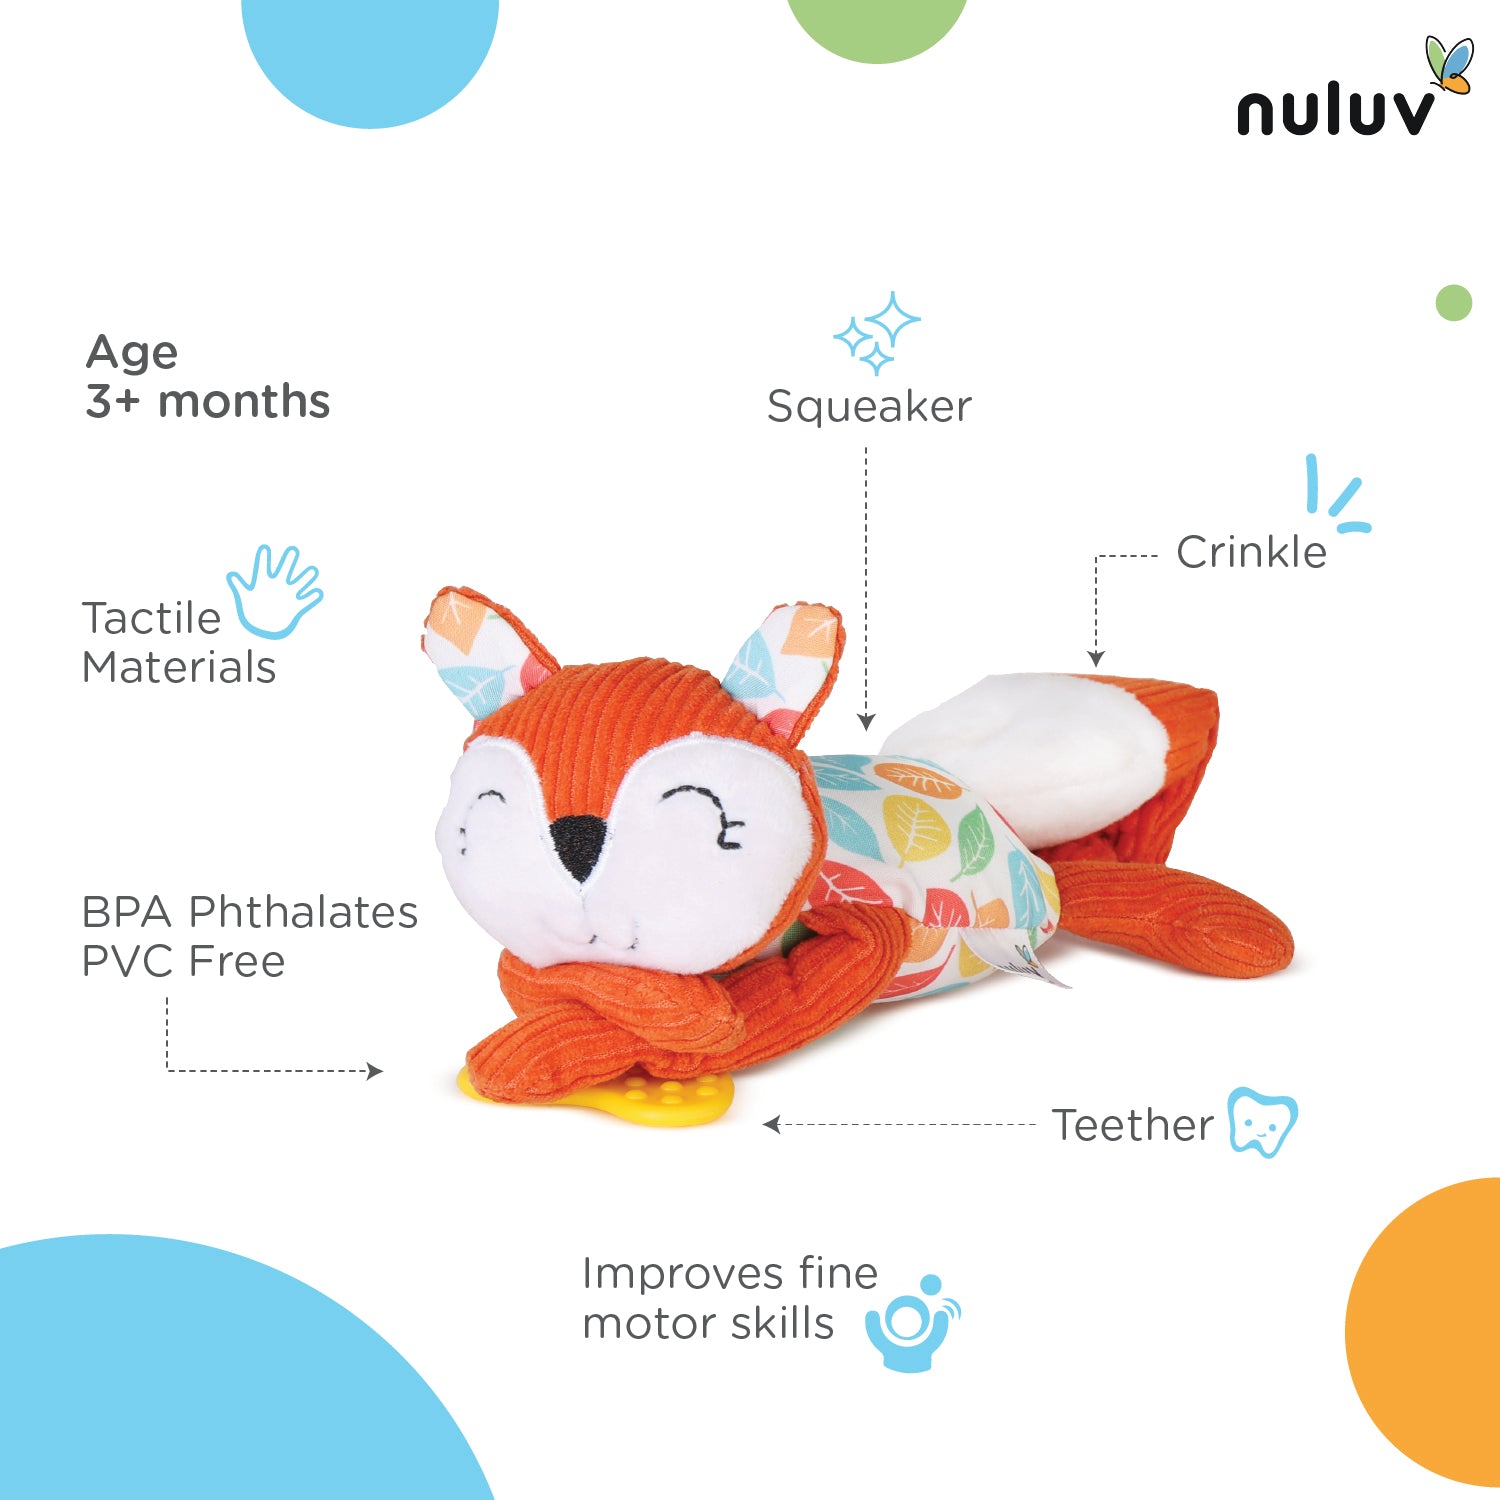 Nuluv Squirrel Soft Toy - Teether, Squeaky Crinkle Squirrel Play Toy For Baby 3 Months+